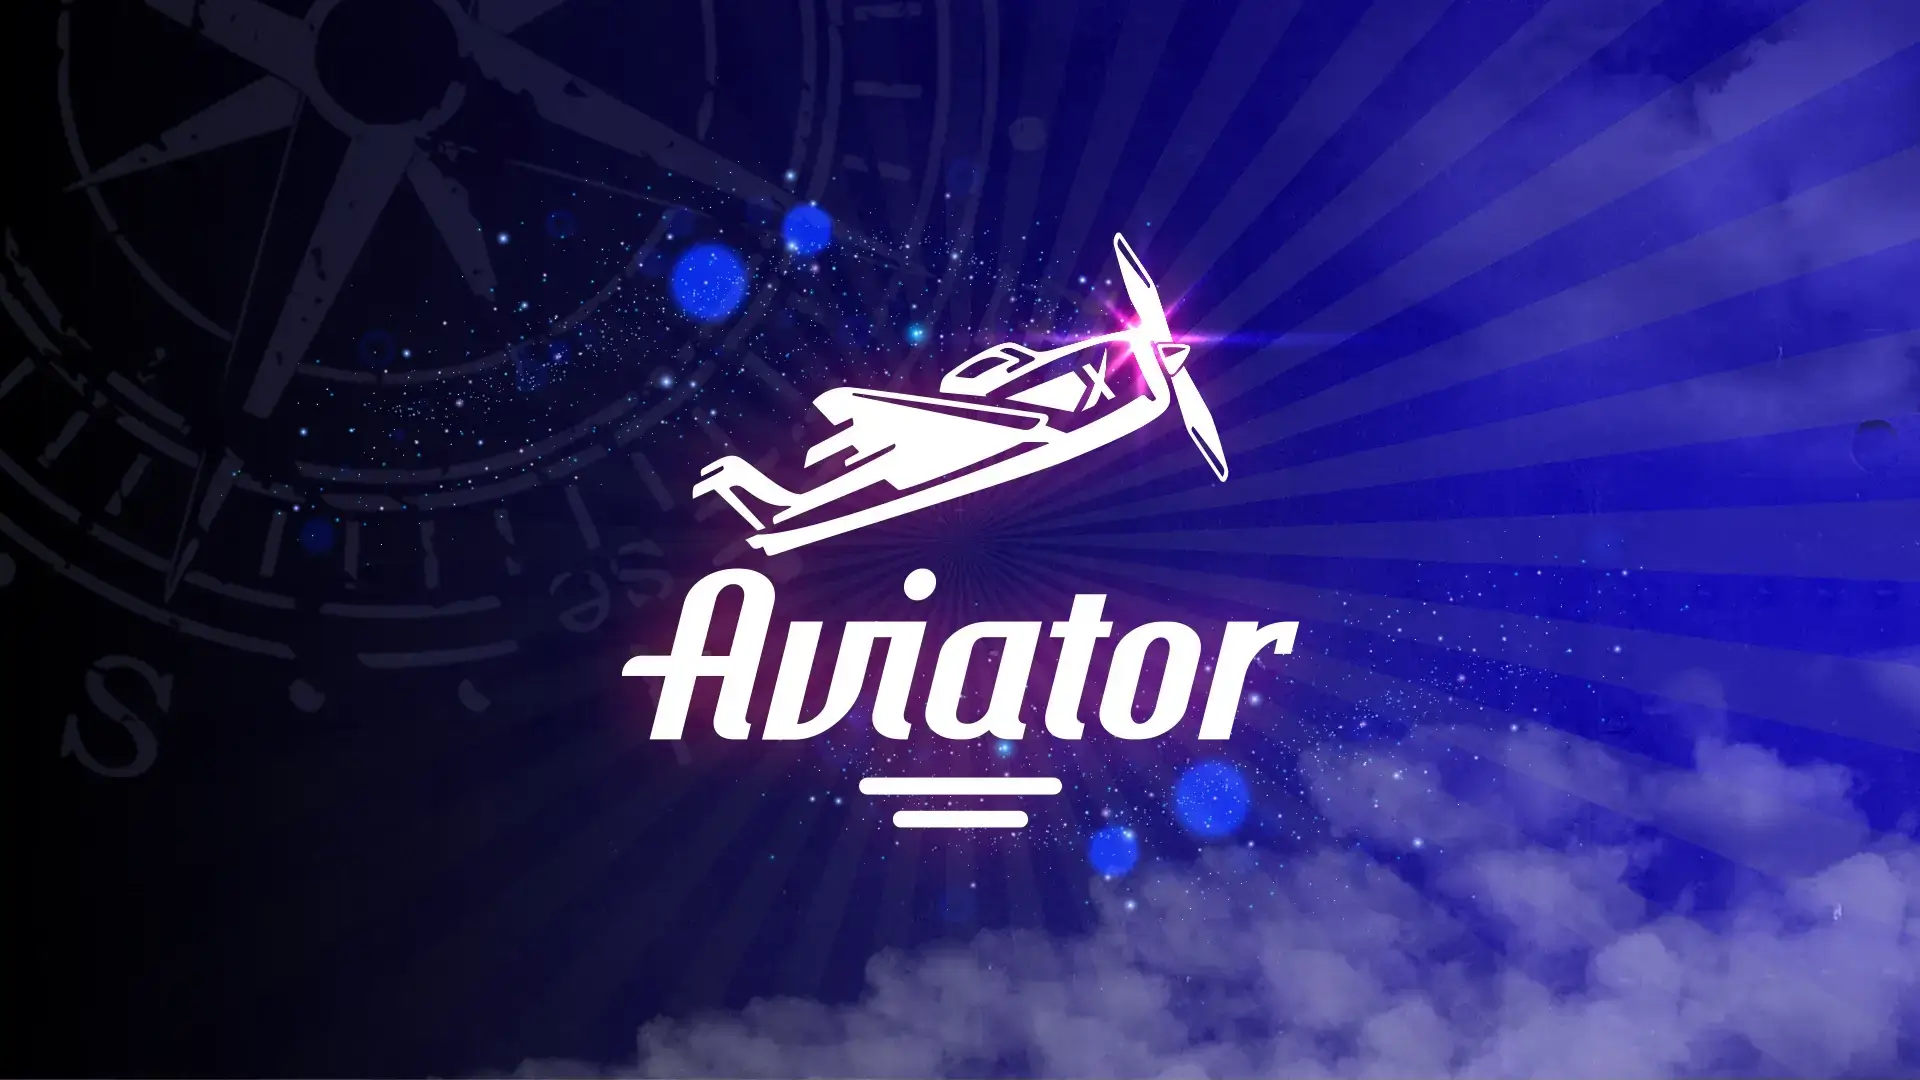 How does the multiplier work in the Aviator game?